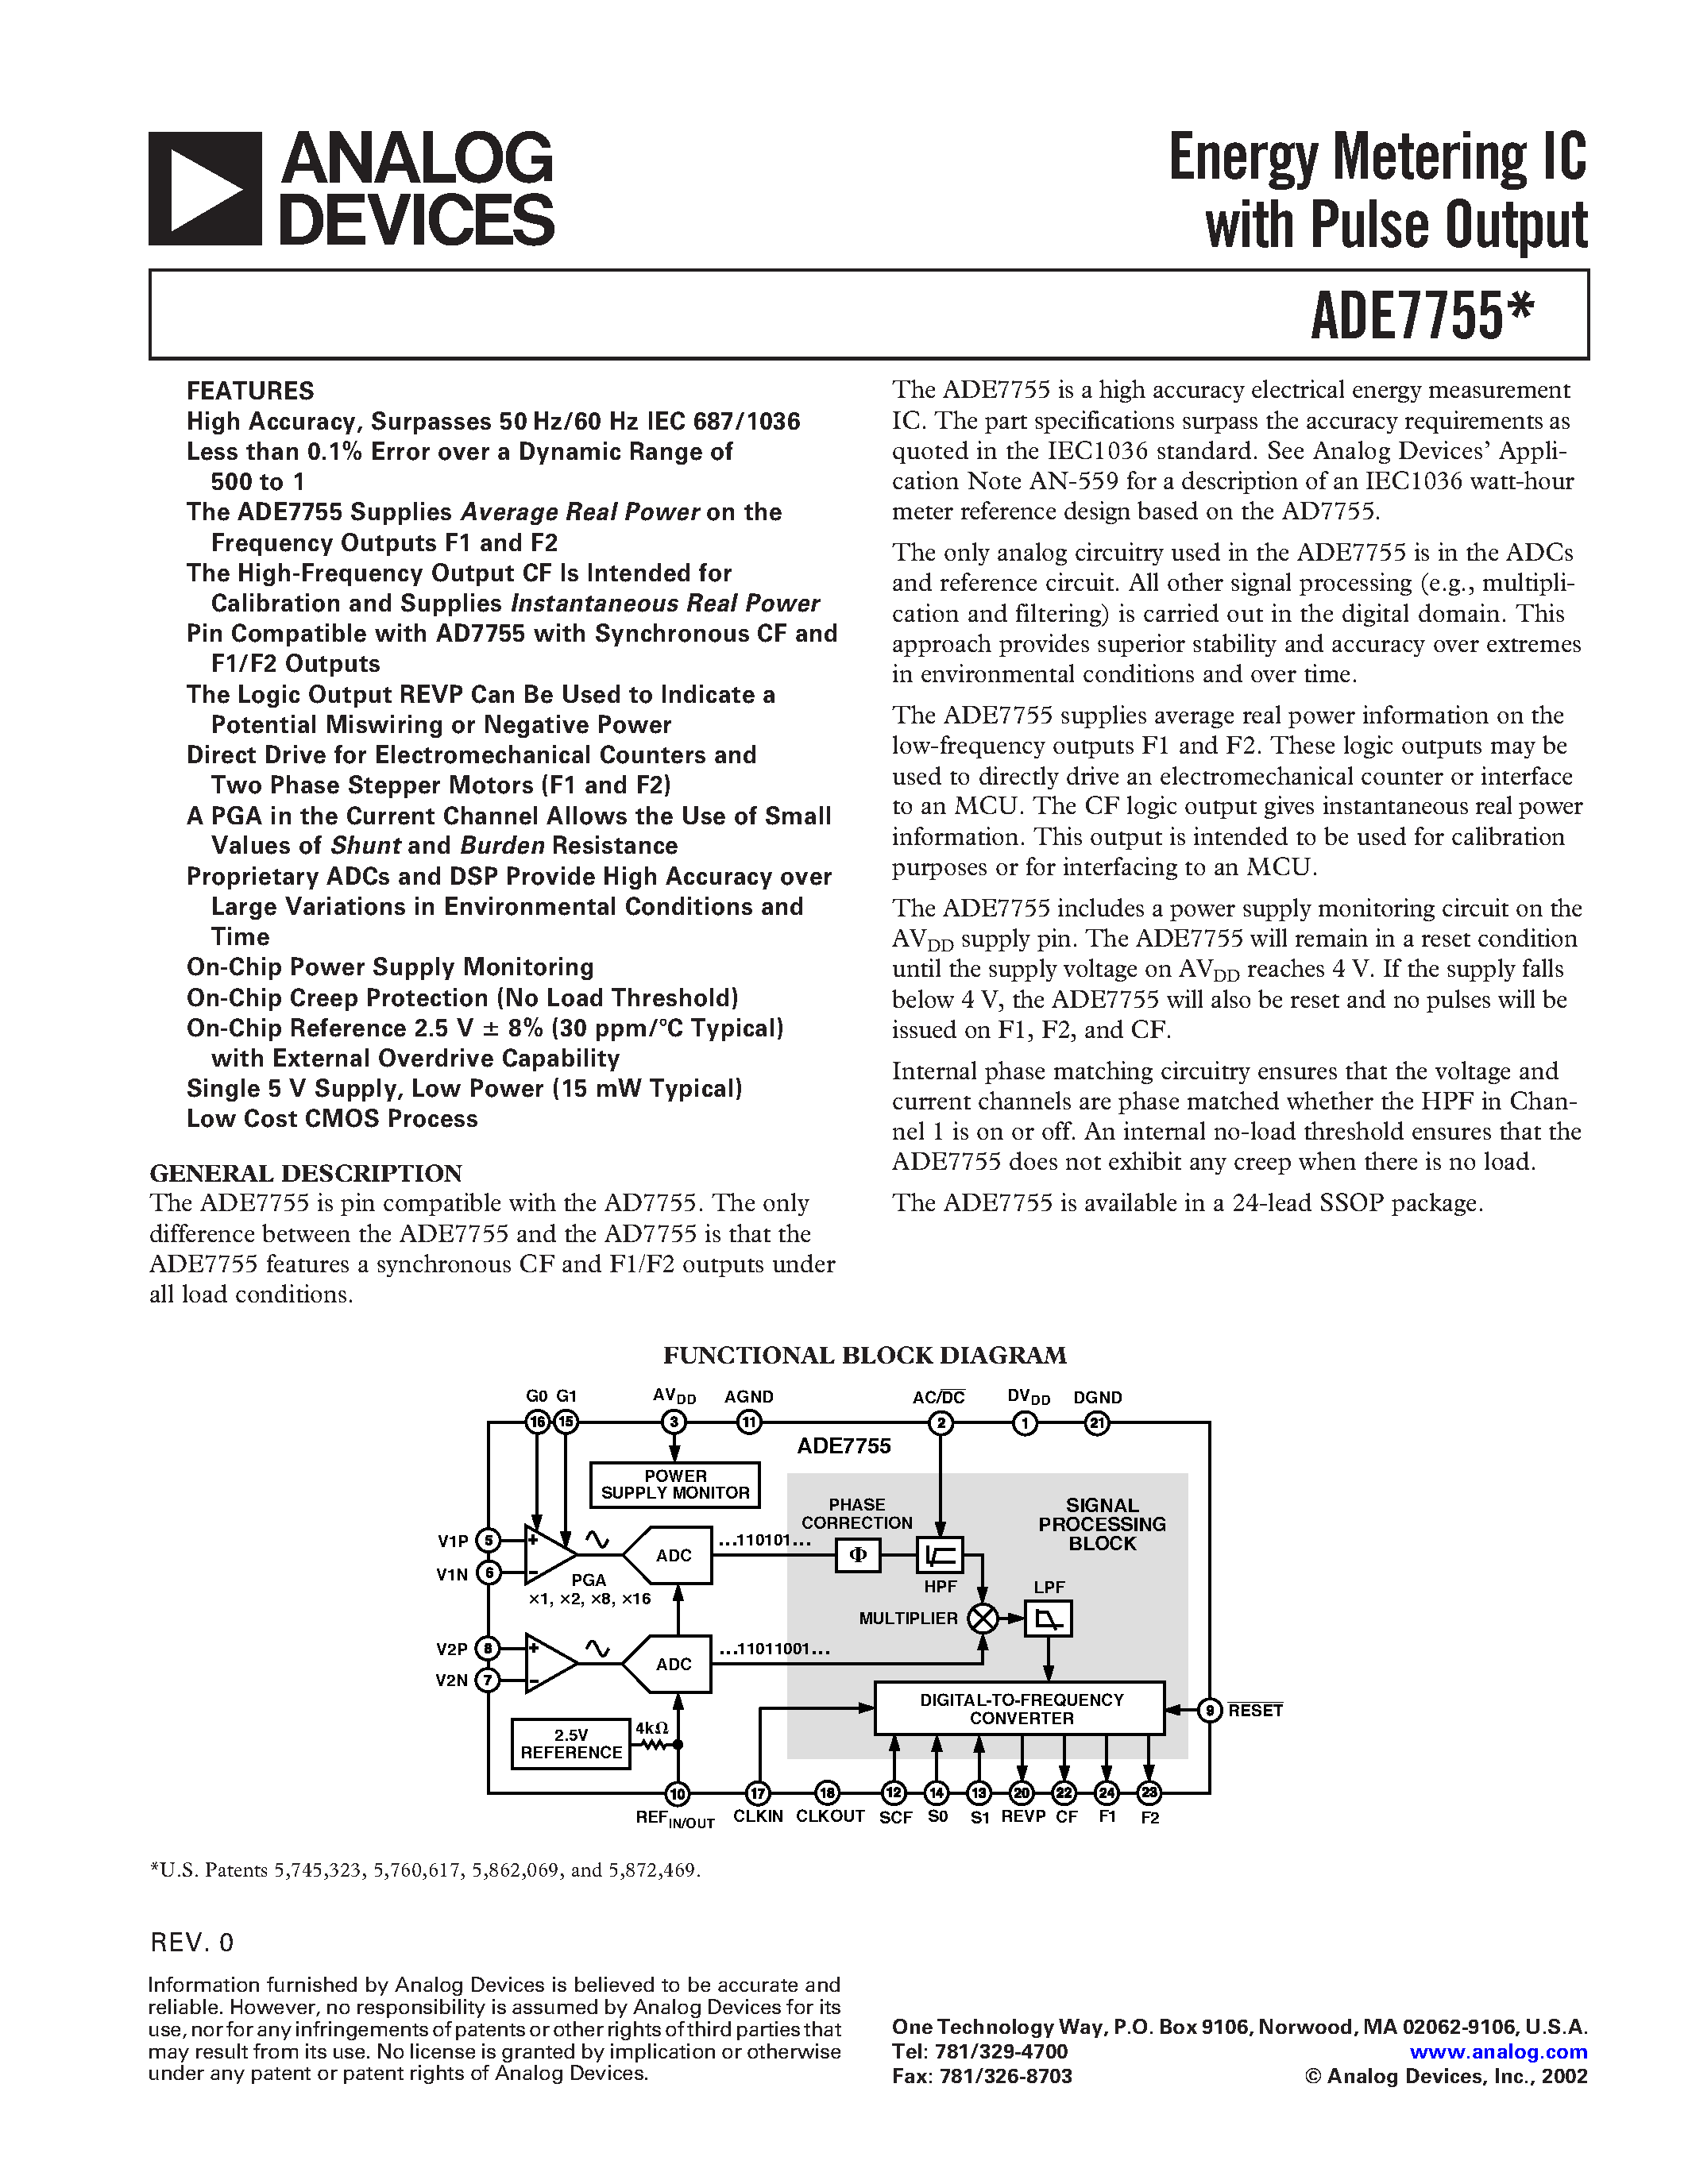 Даташит ADE7755 - Energy Metering IC with Pulse Output страница 1